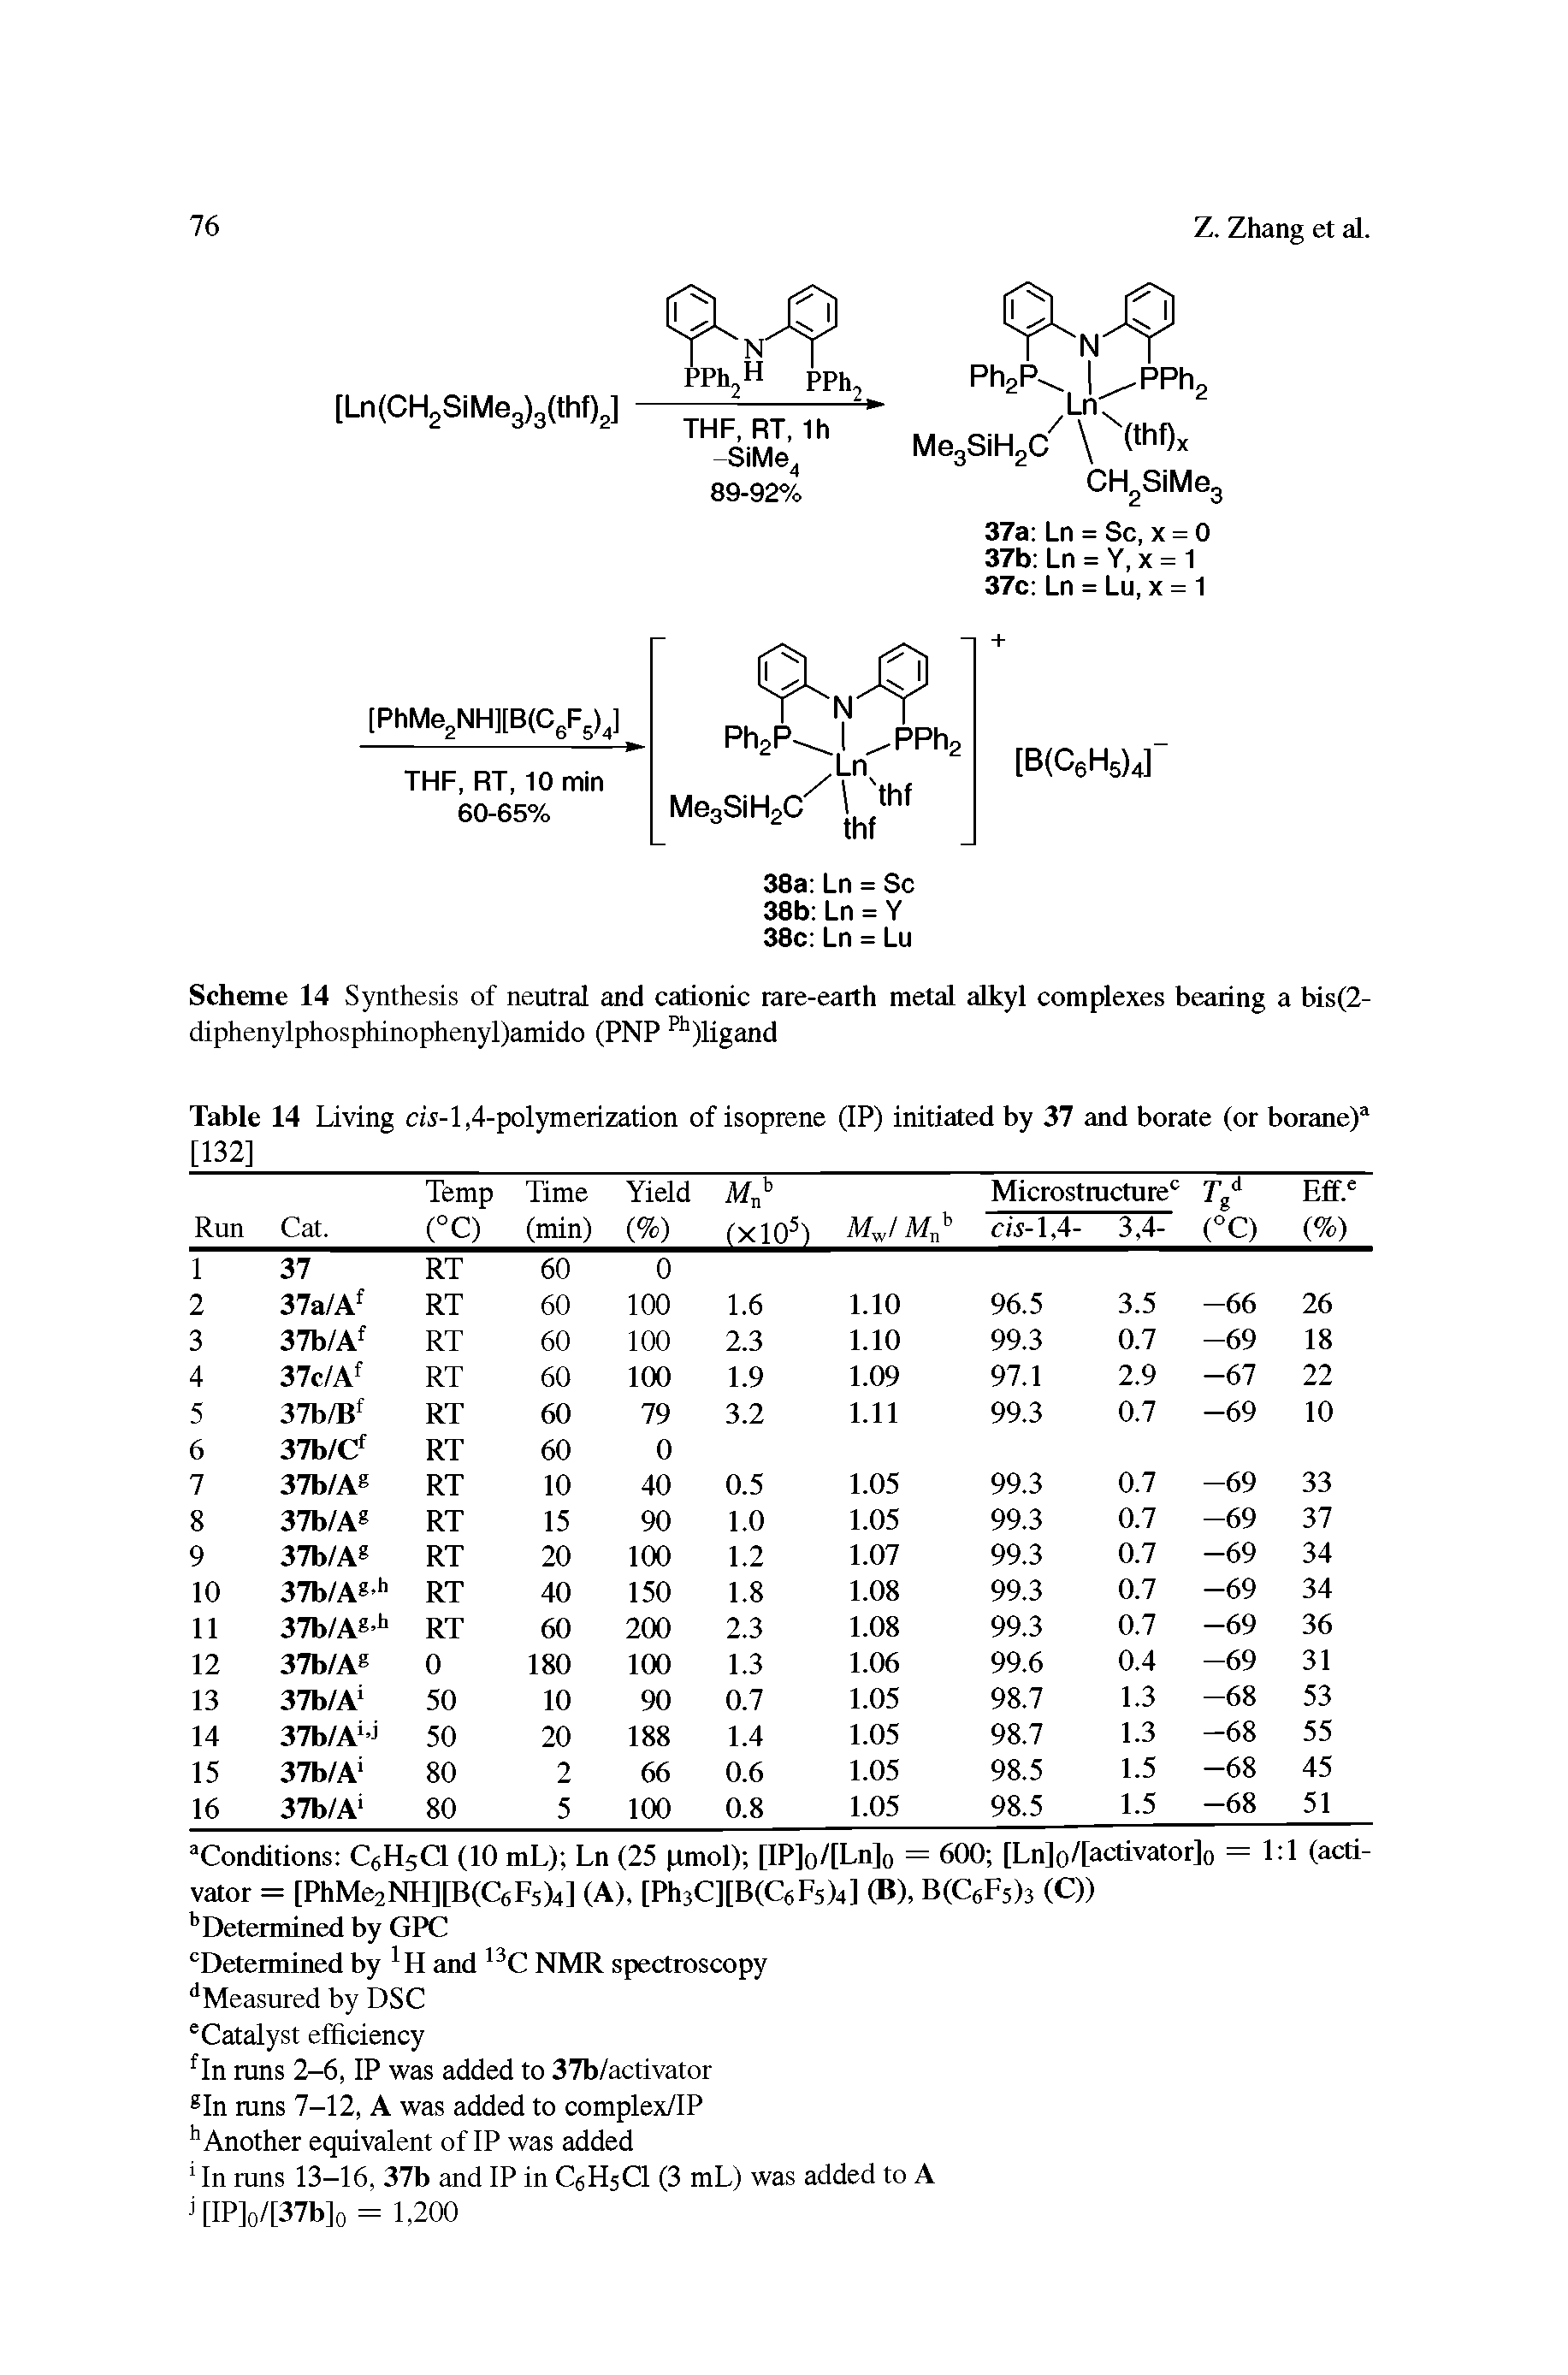 Scheme 14 Synthesis of neutral and cationic rare-earth metal alkyl complexes bearing a bis(2-diphenylphosphinophenyl)amido (PNP )ligand...